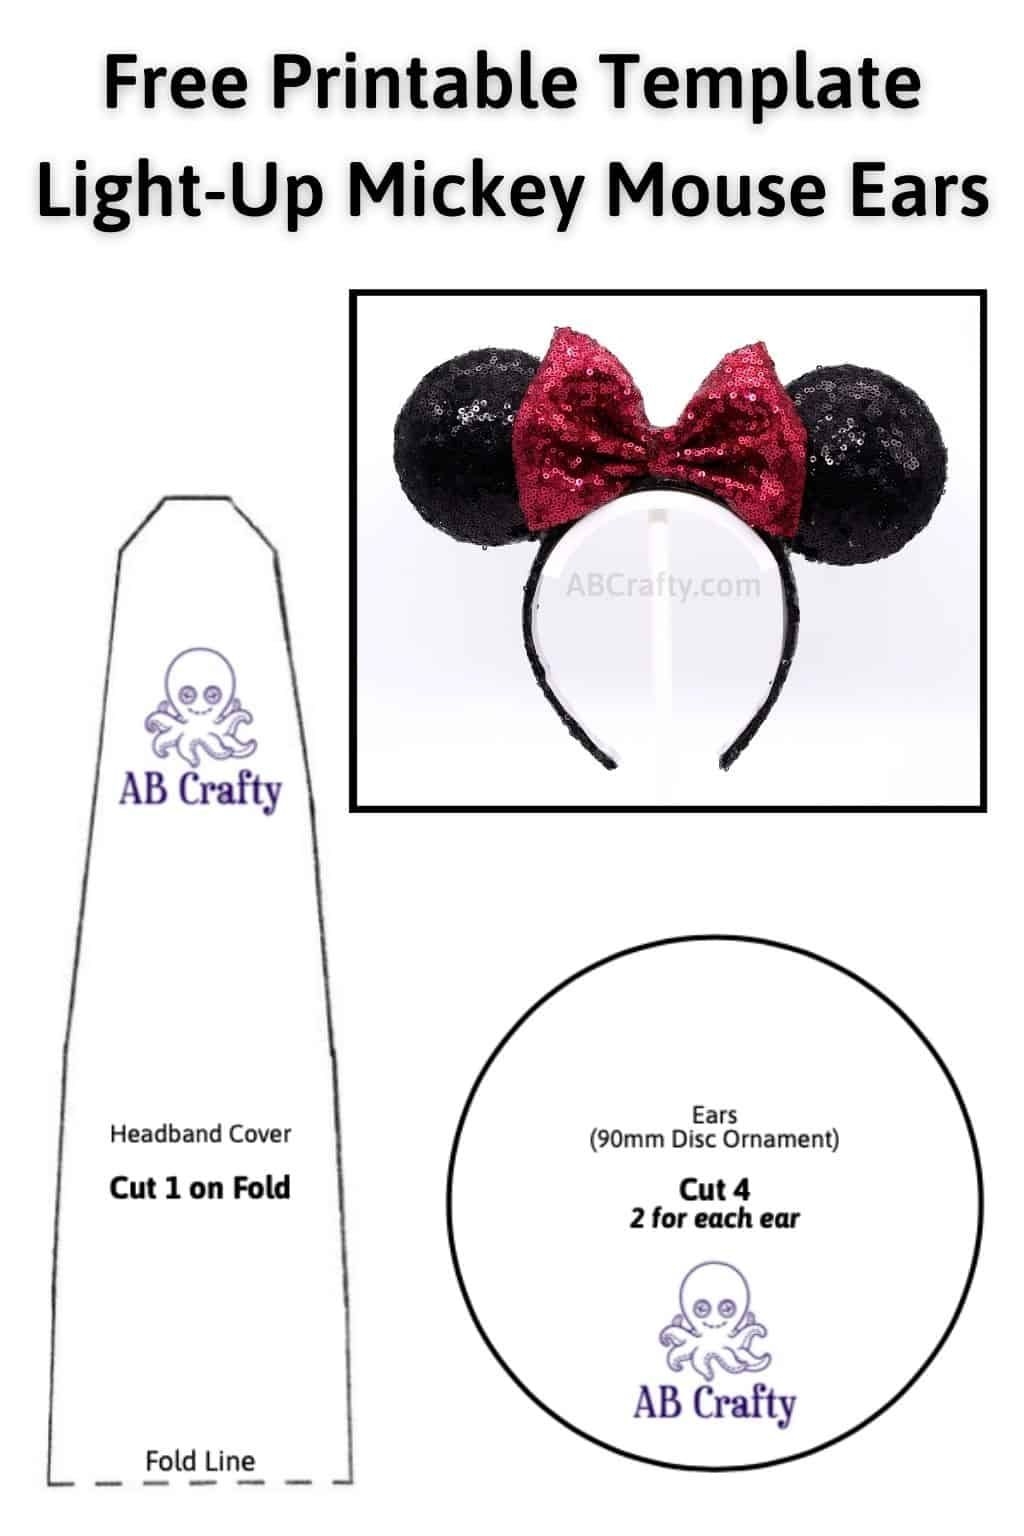 Free Printable Minnie Mouse Ears Template Diy Mickey Mouse Ears Mickey Mouse Ears Minnie Ears Diy